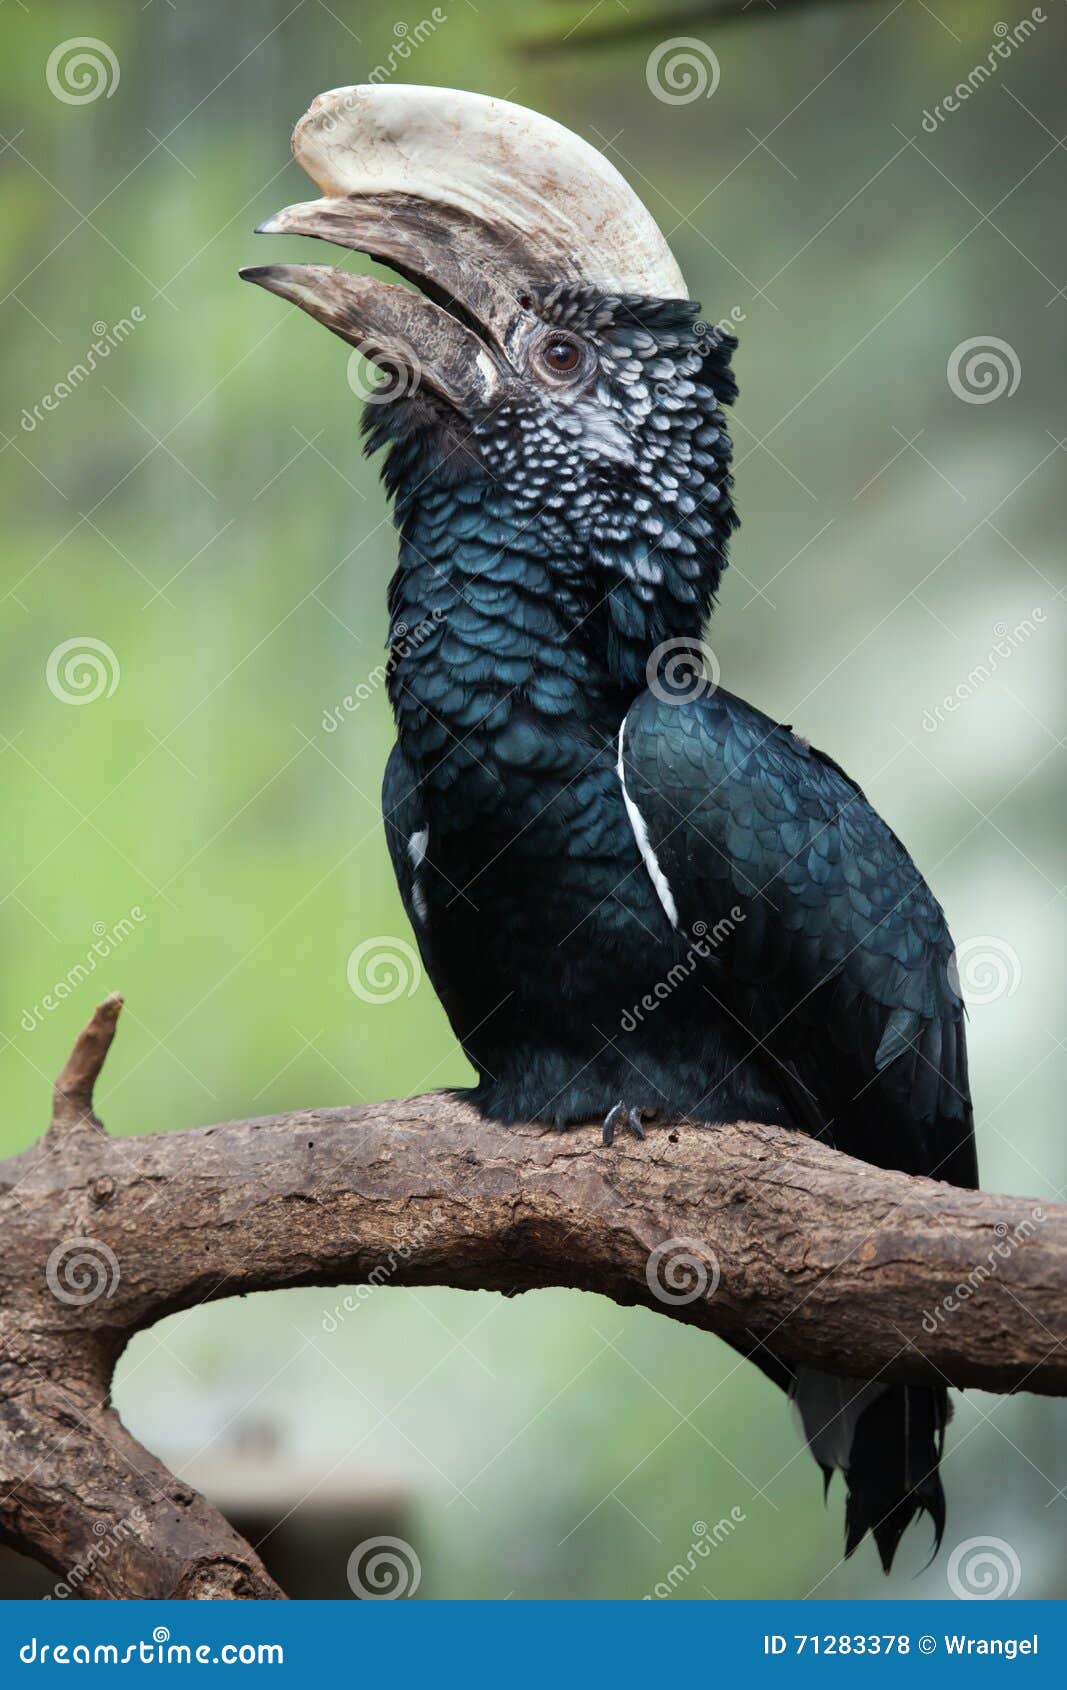 silvery-cheeked hornbill (bycanistes brevis).